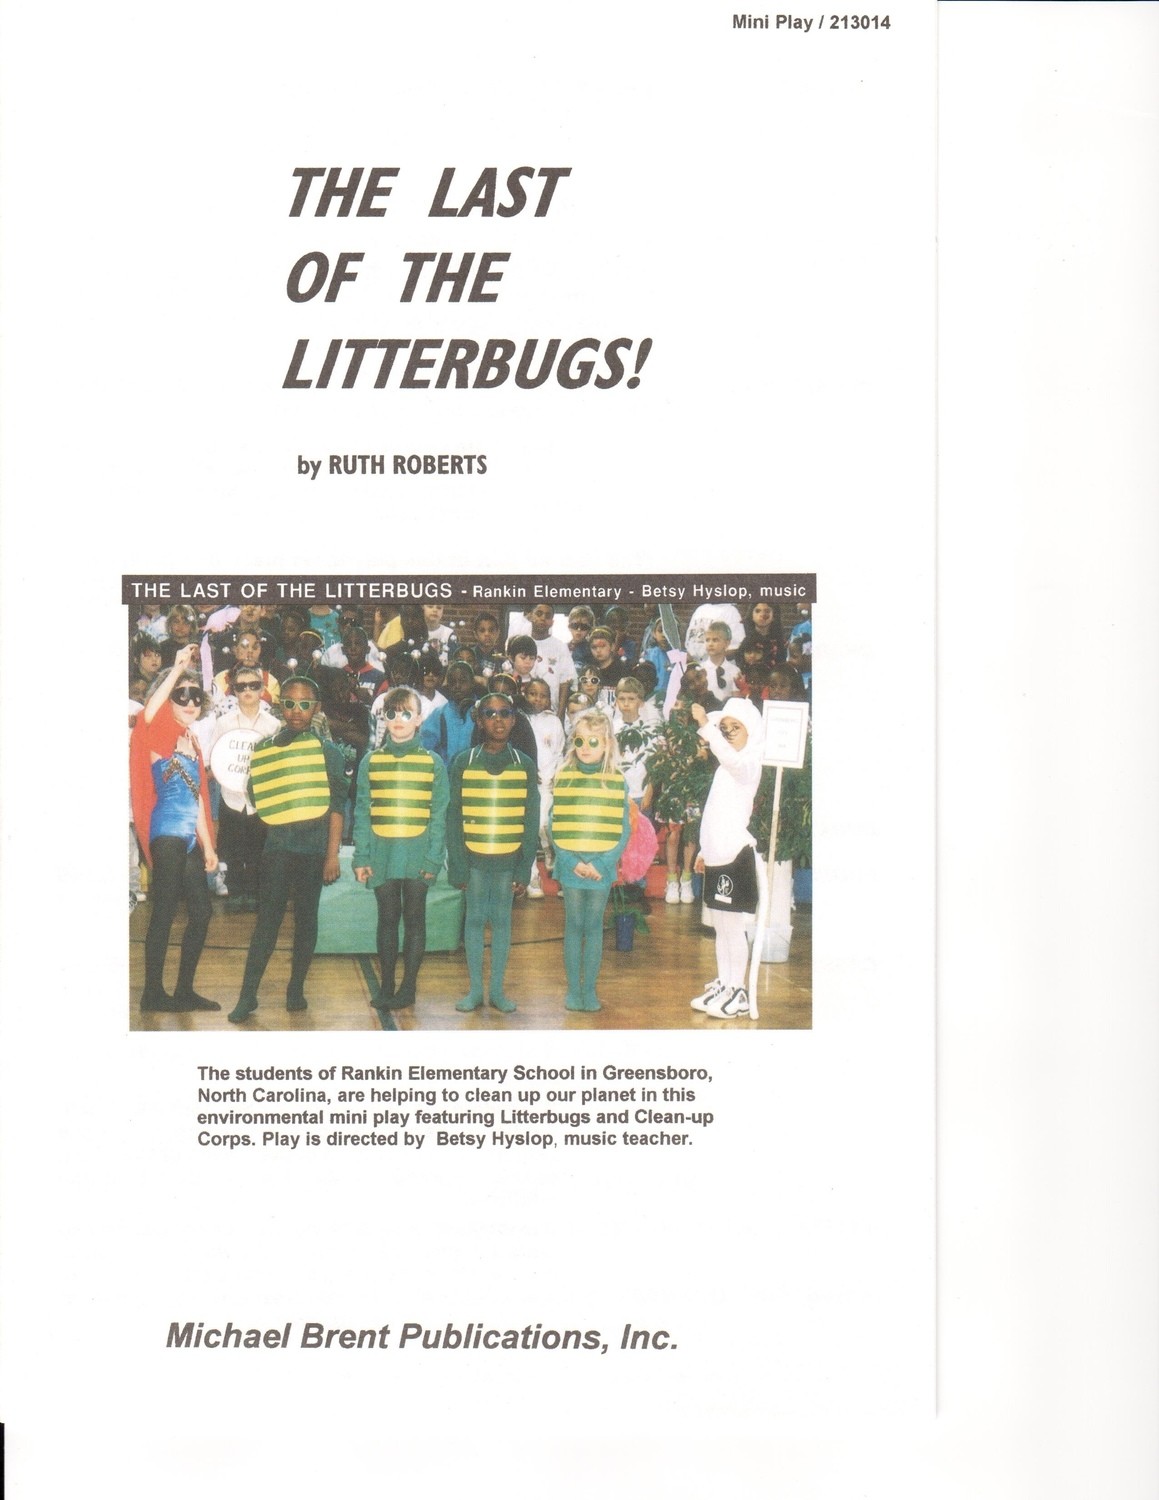 The Last of the Litterbugs - Book/CD